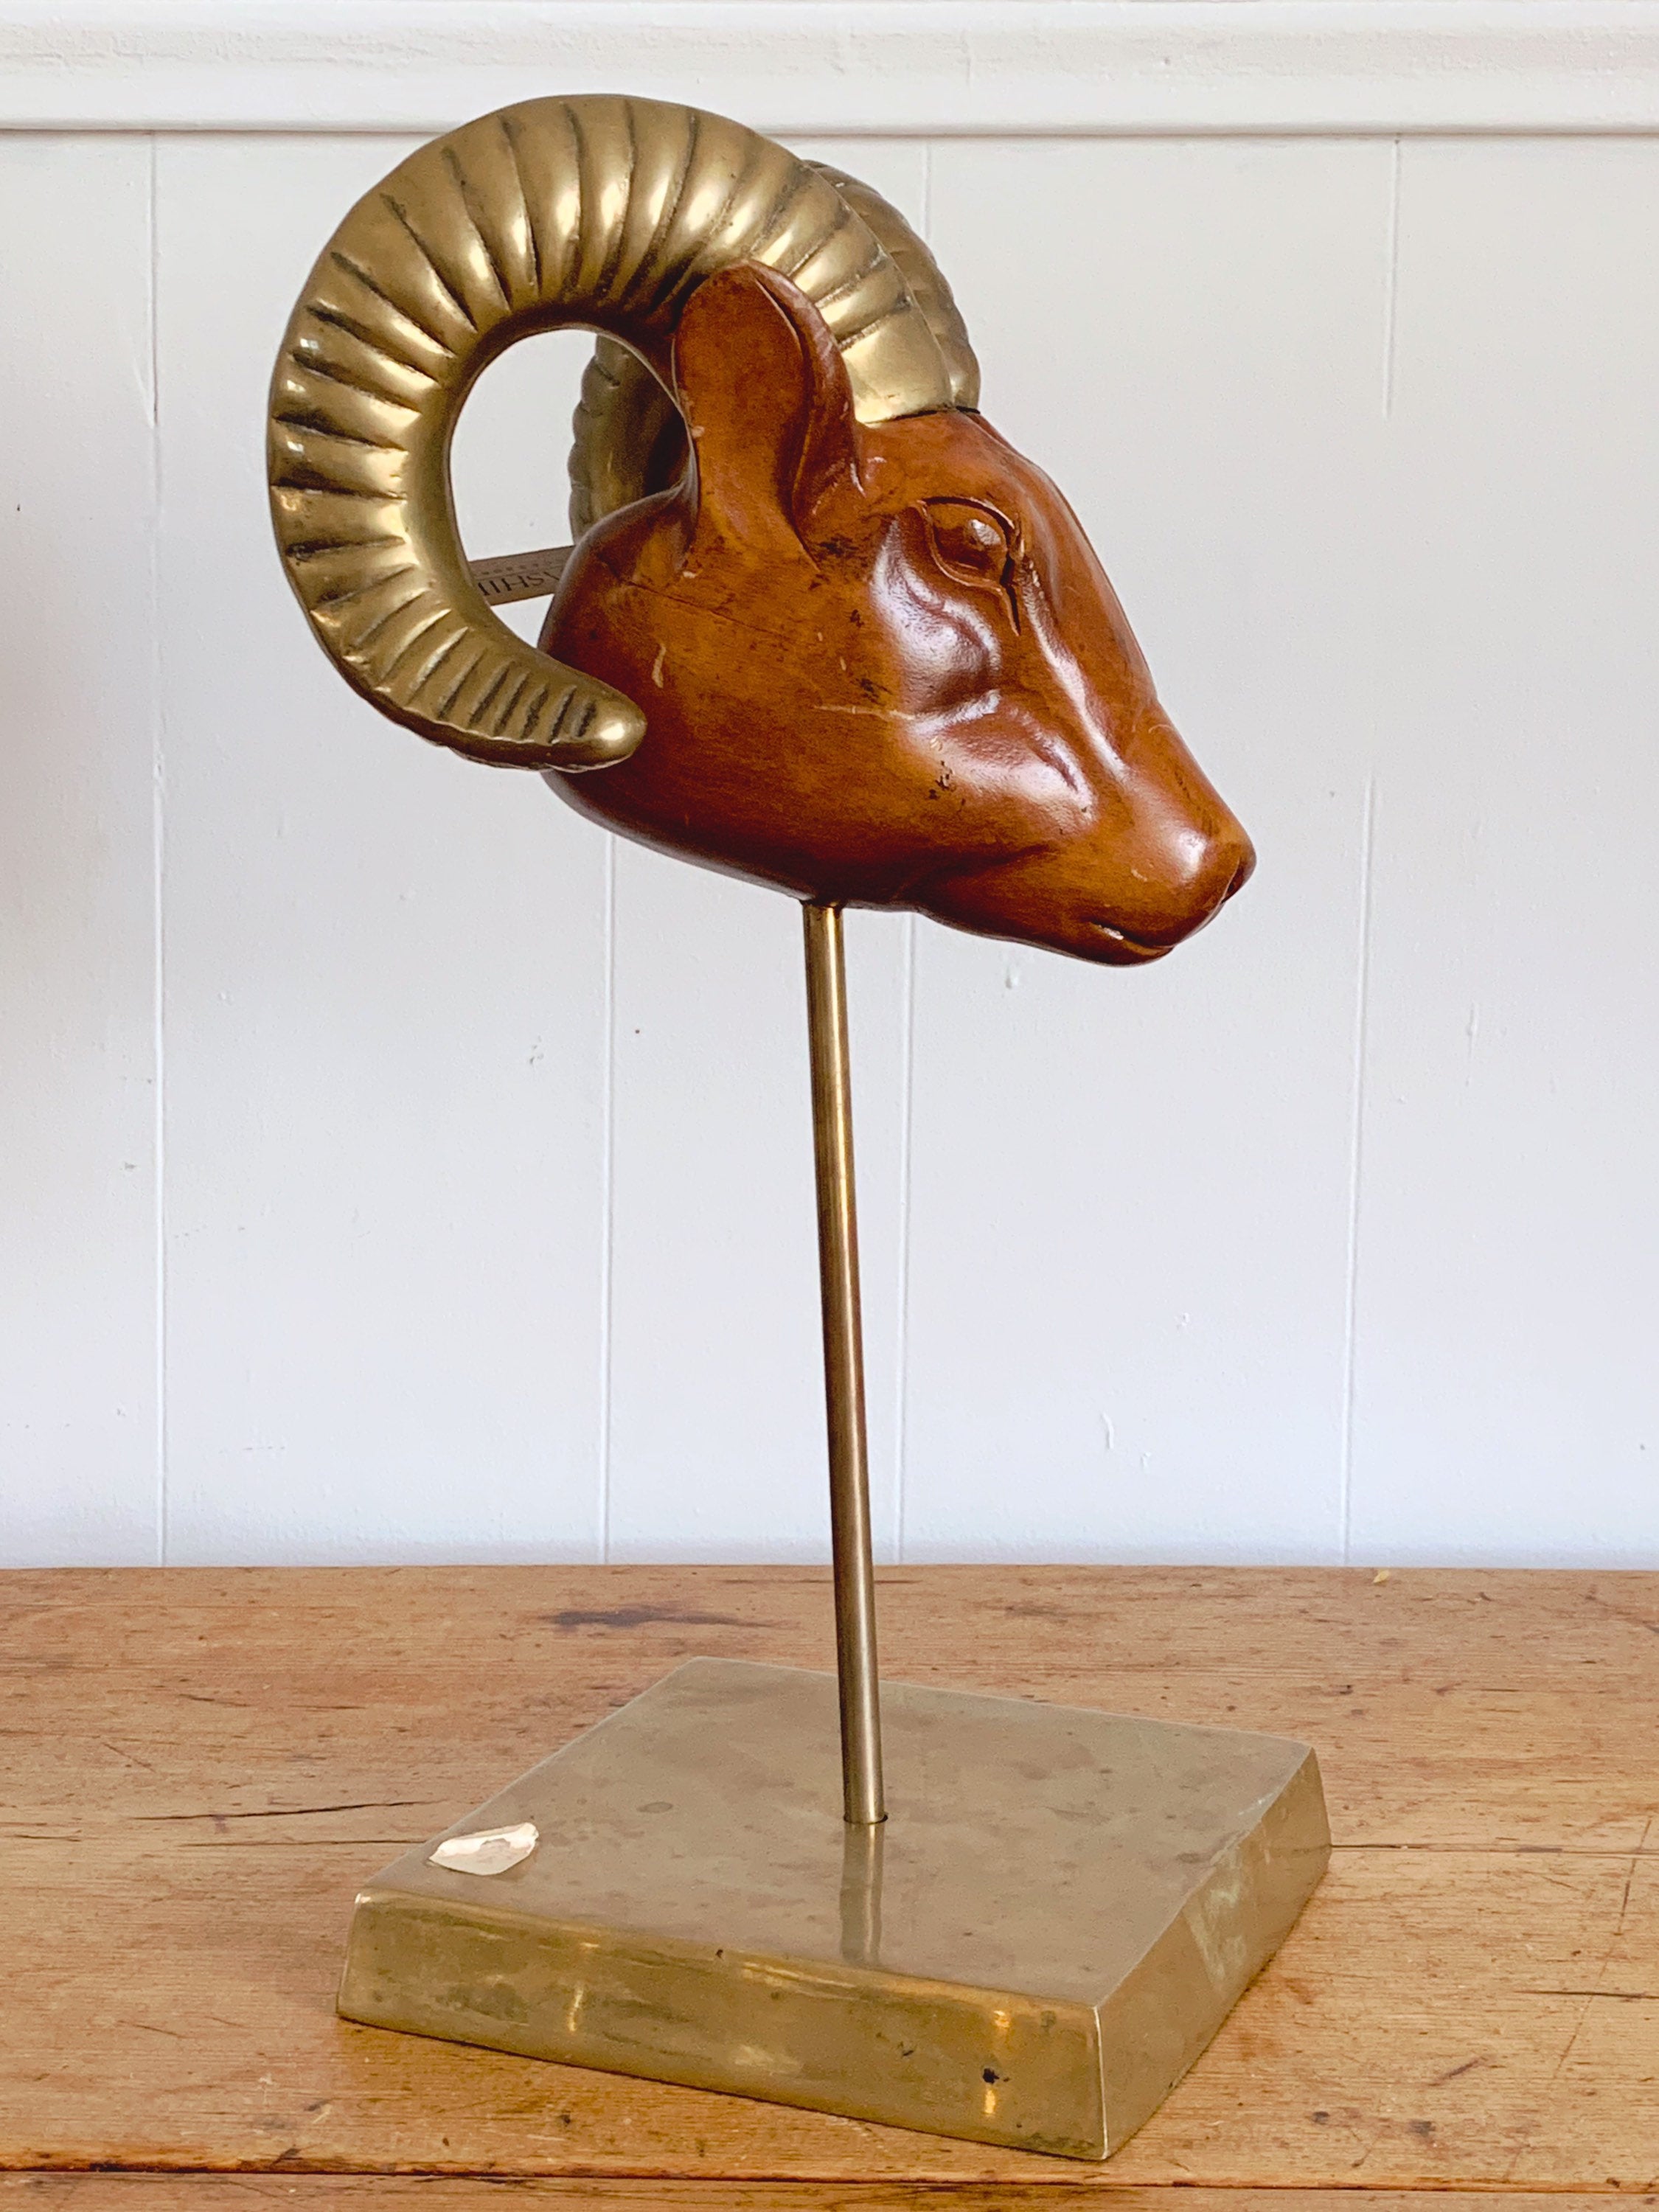 Vintage 1980s Dolbi Cashier Wood and Brass Rams Head Art Sculpture On Pedestal | Hand Crafted Stylized Home Decor